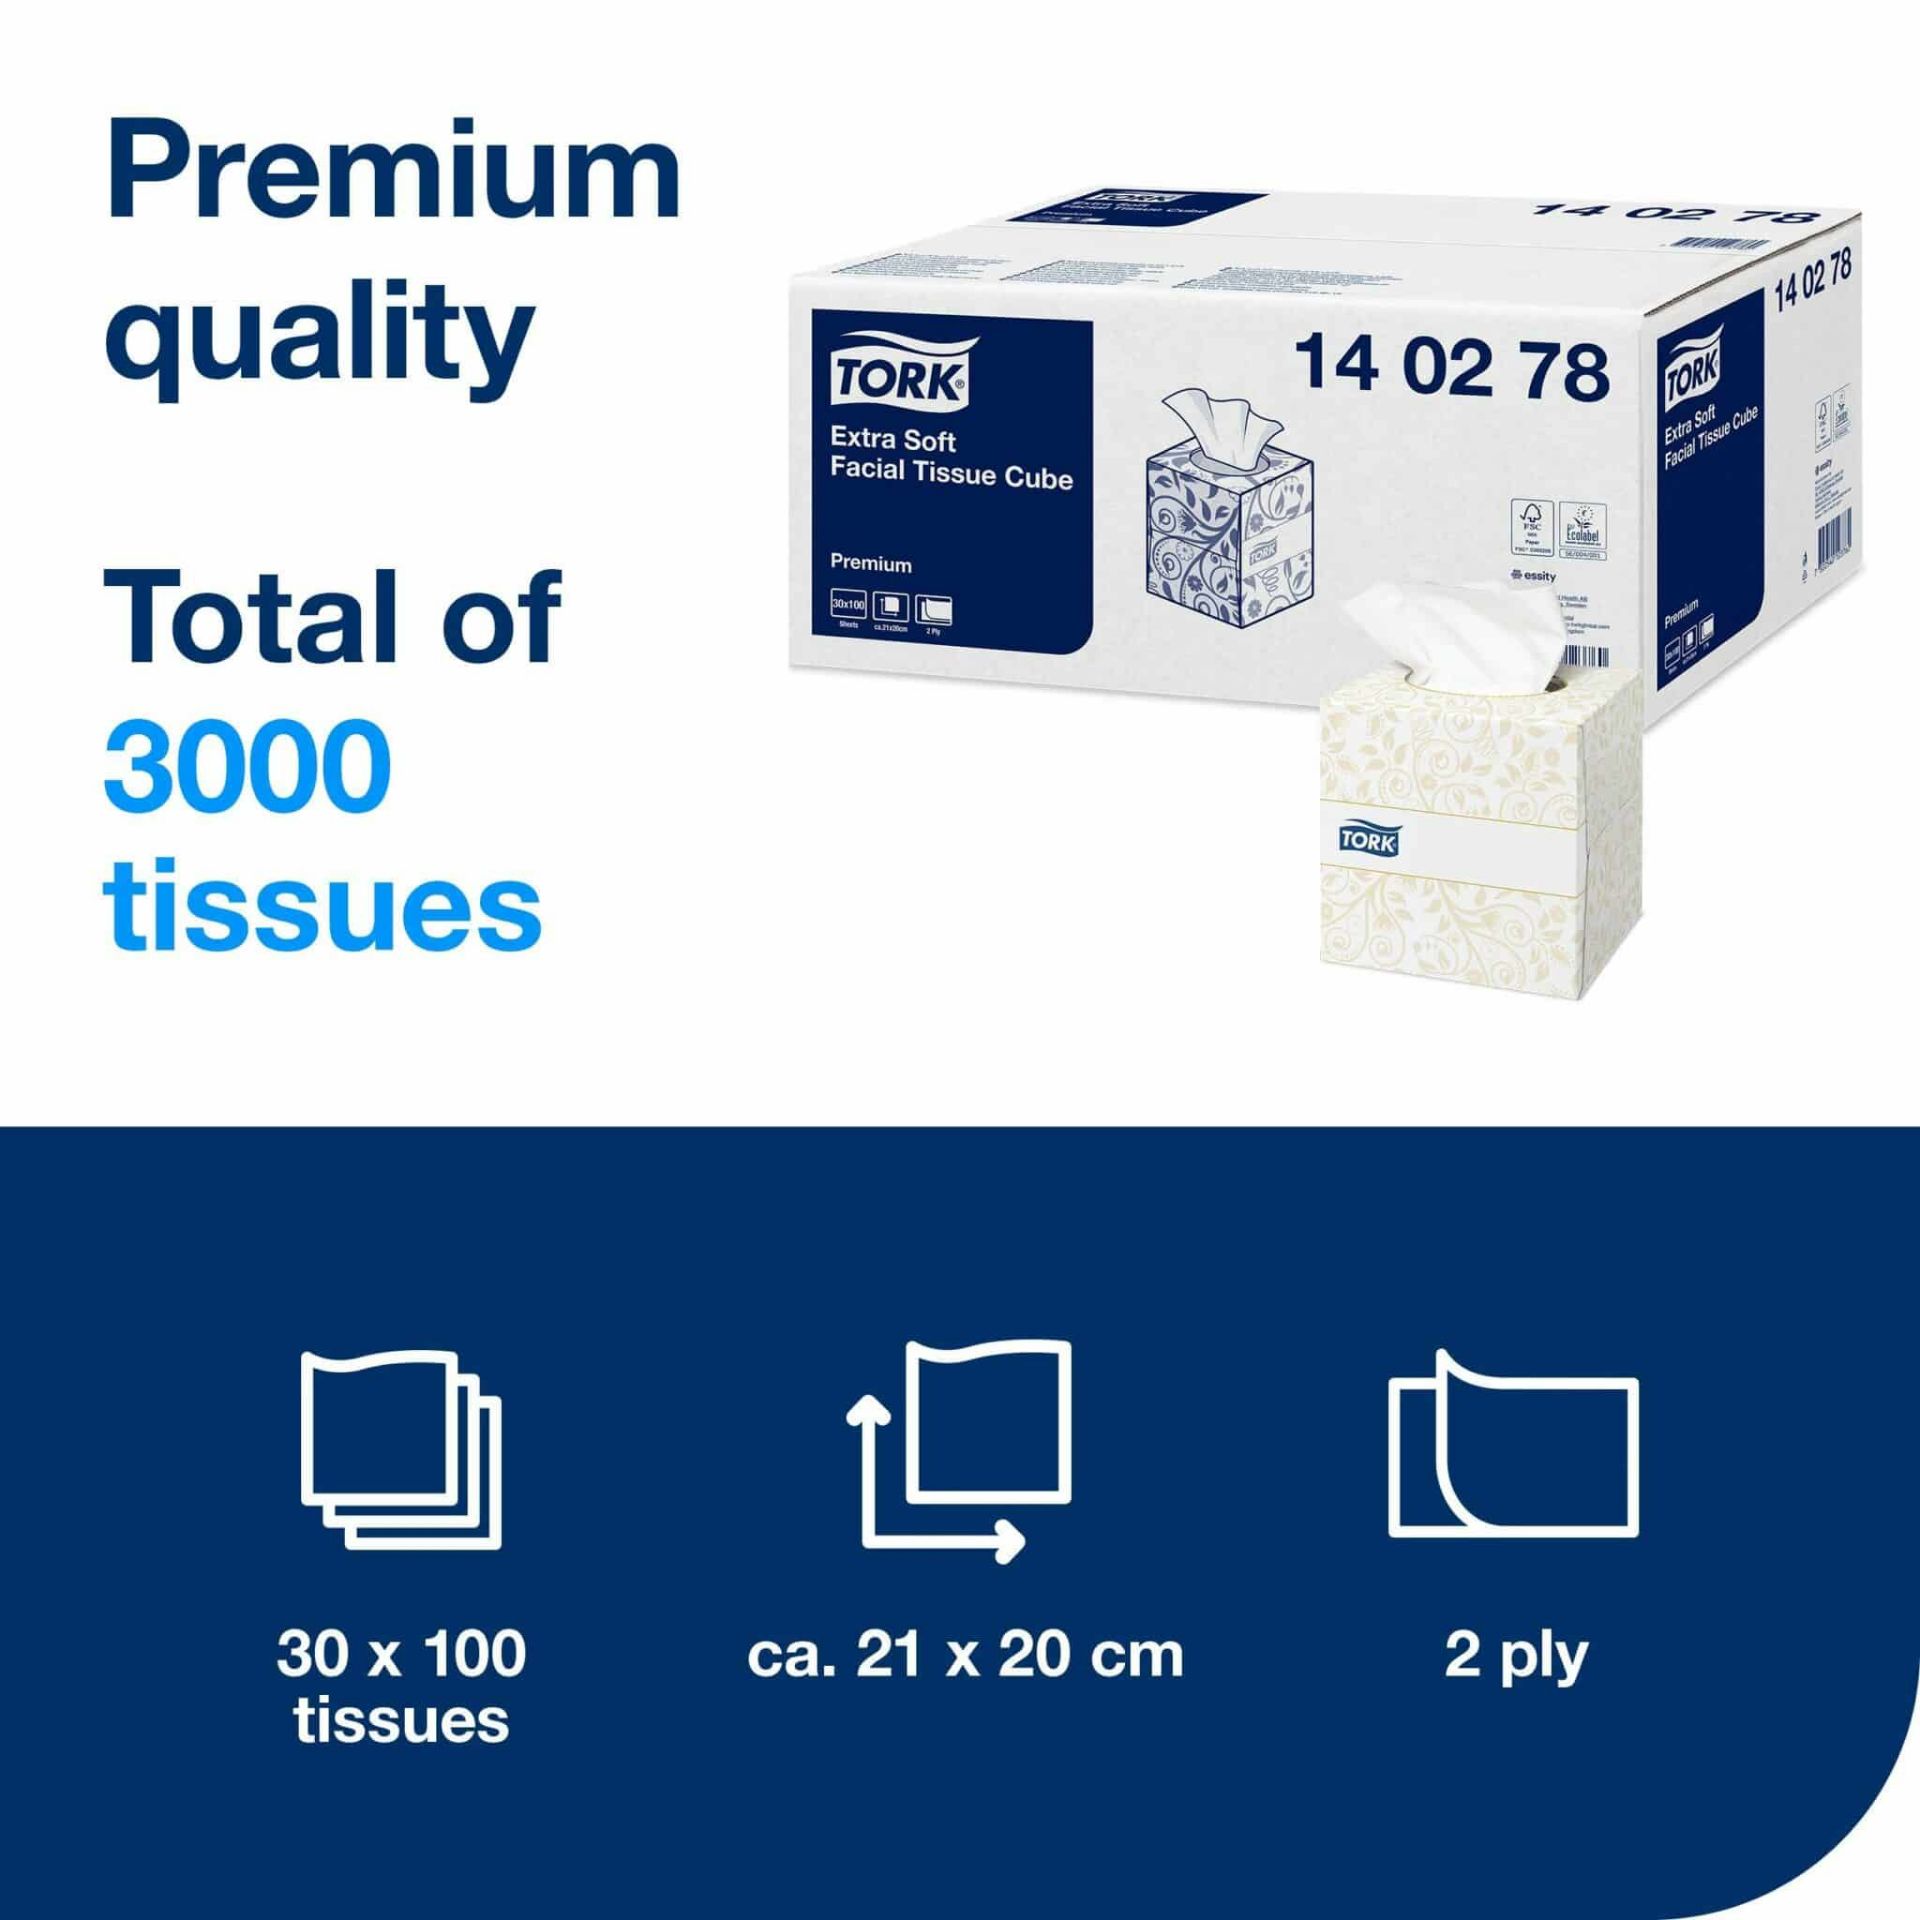 Picture of Tork Soft Facial Tissues White F1, Premium, 2-ply, 30 x 100 sheets CLEARANCE price